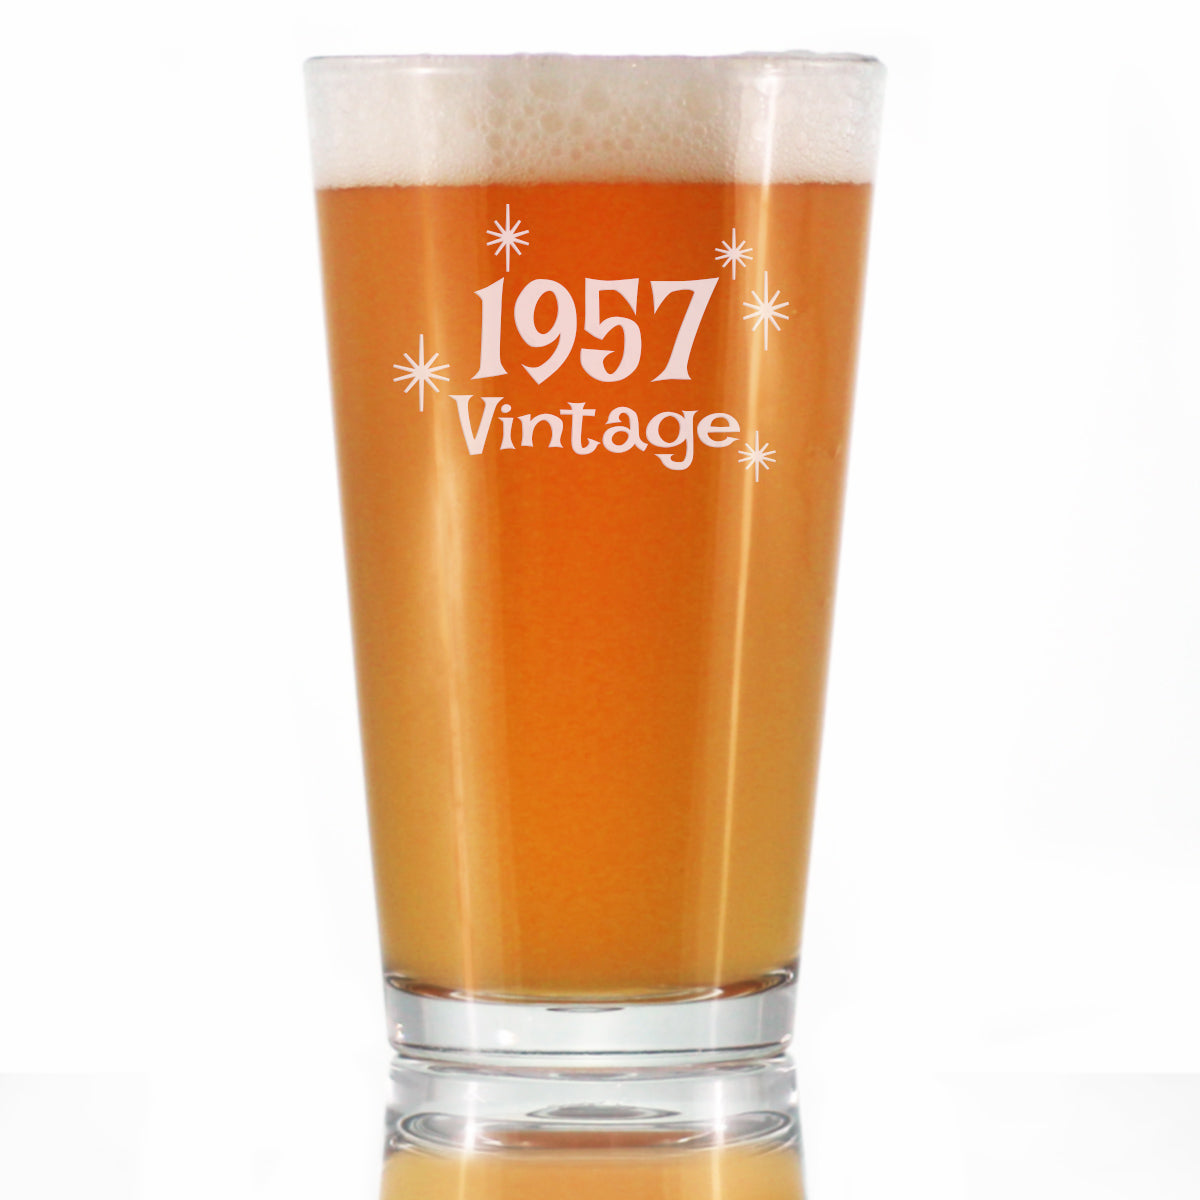 Vintage 1957 - Pint Glass for Beer - 67th Birthday Gifts for Men or Women Turning 67 - Fun Bday Party Decor - 16 oz